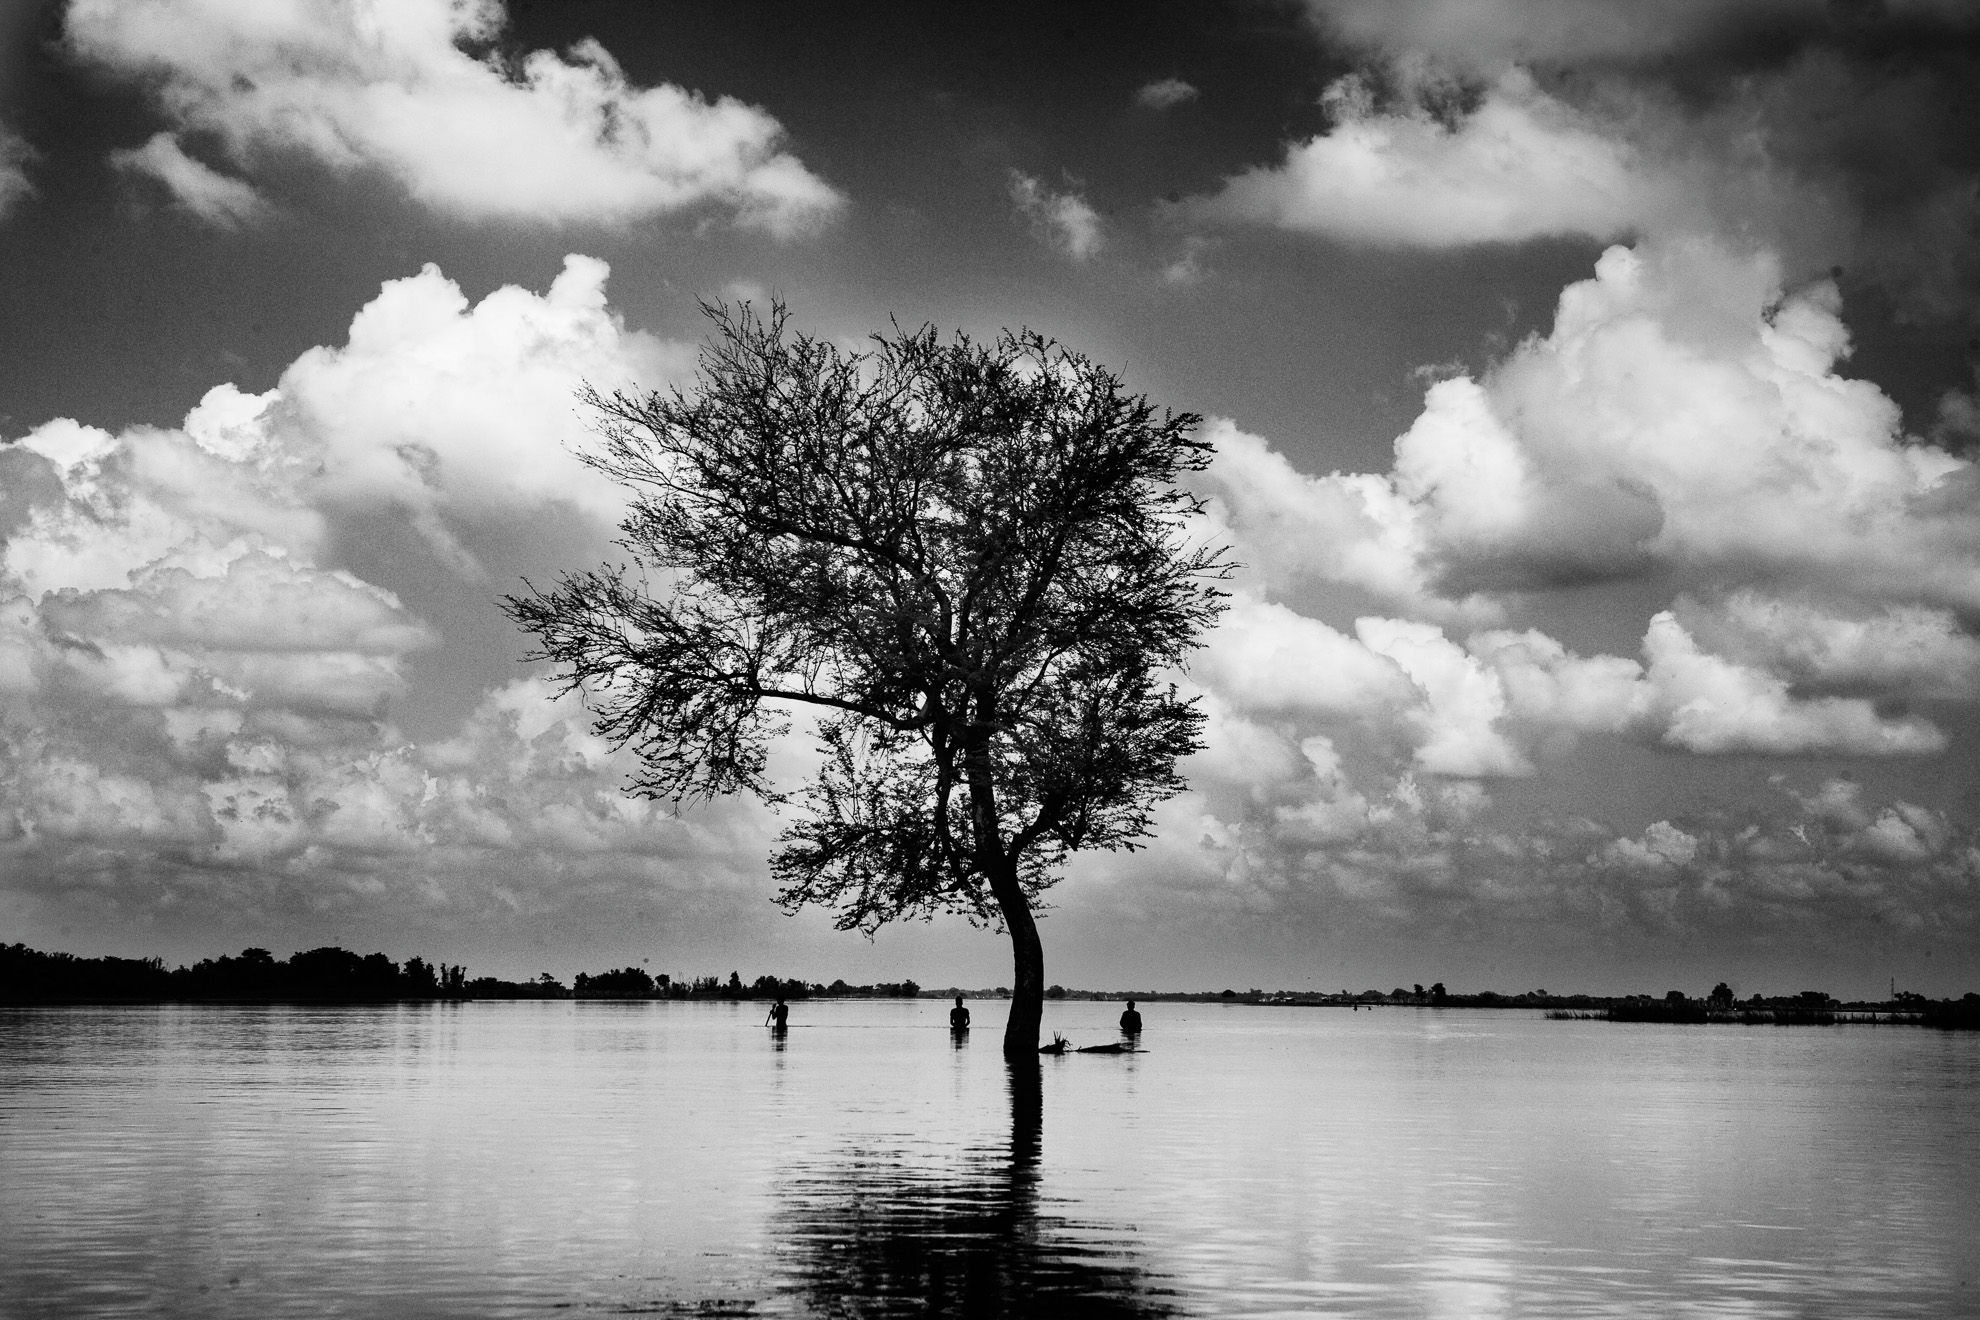 A tree in the middle of the flood area in India's northeastern state of Bihar, September 11, 2008.